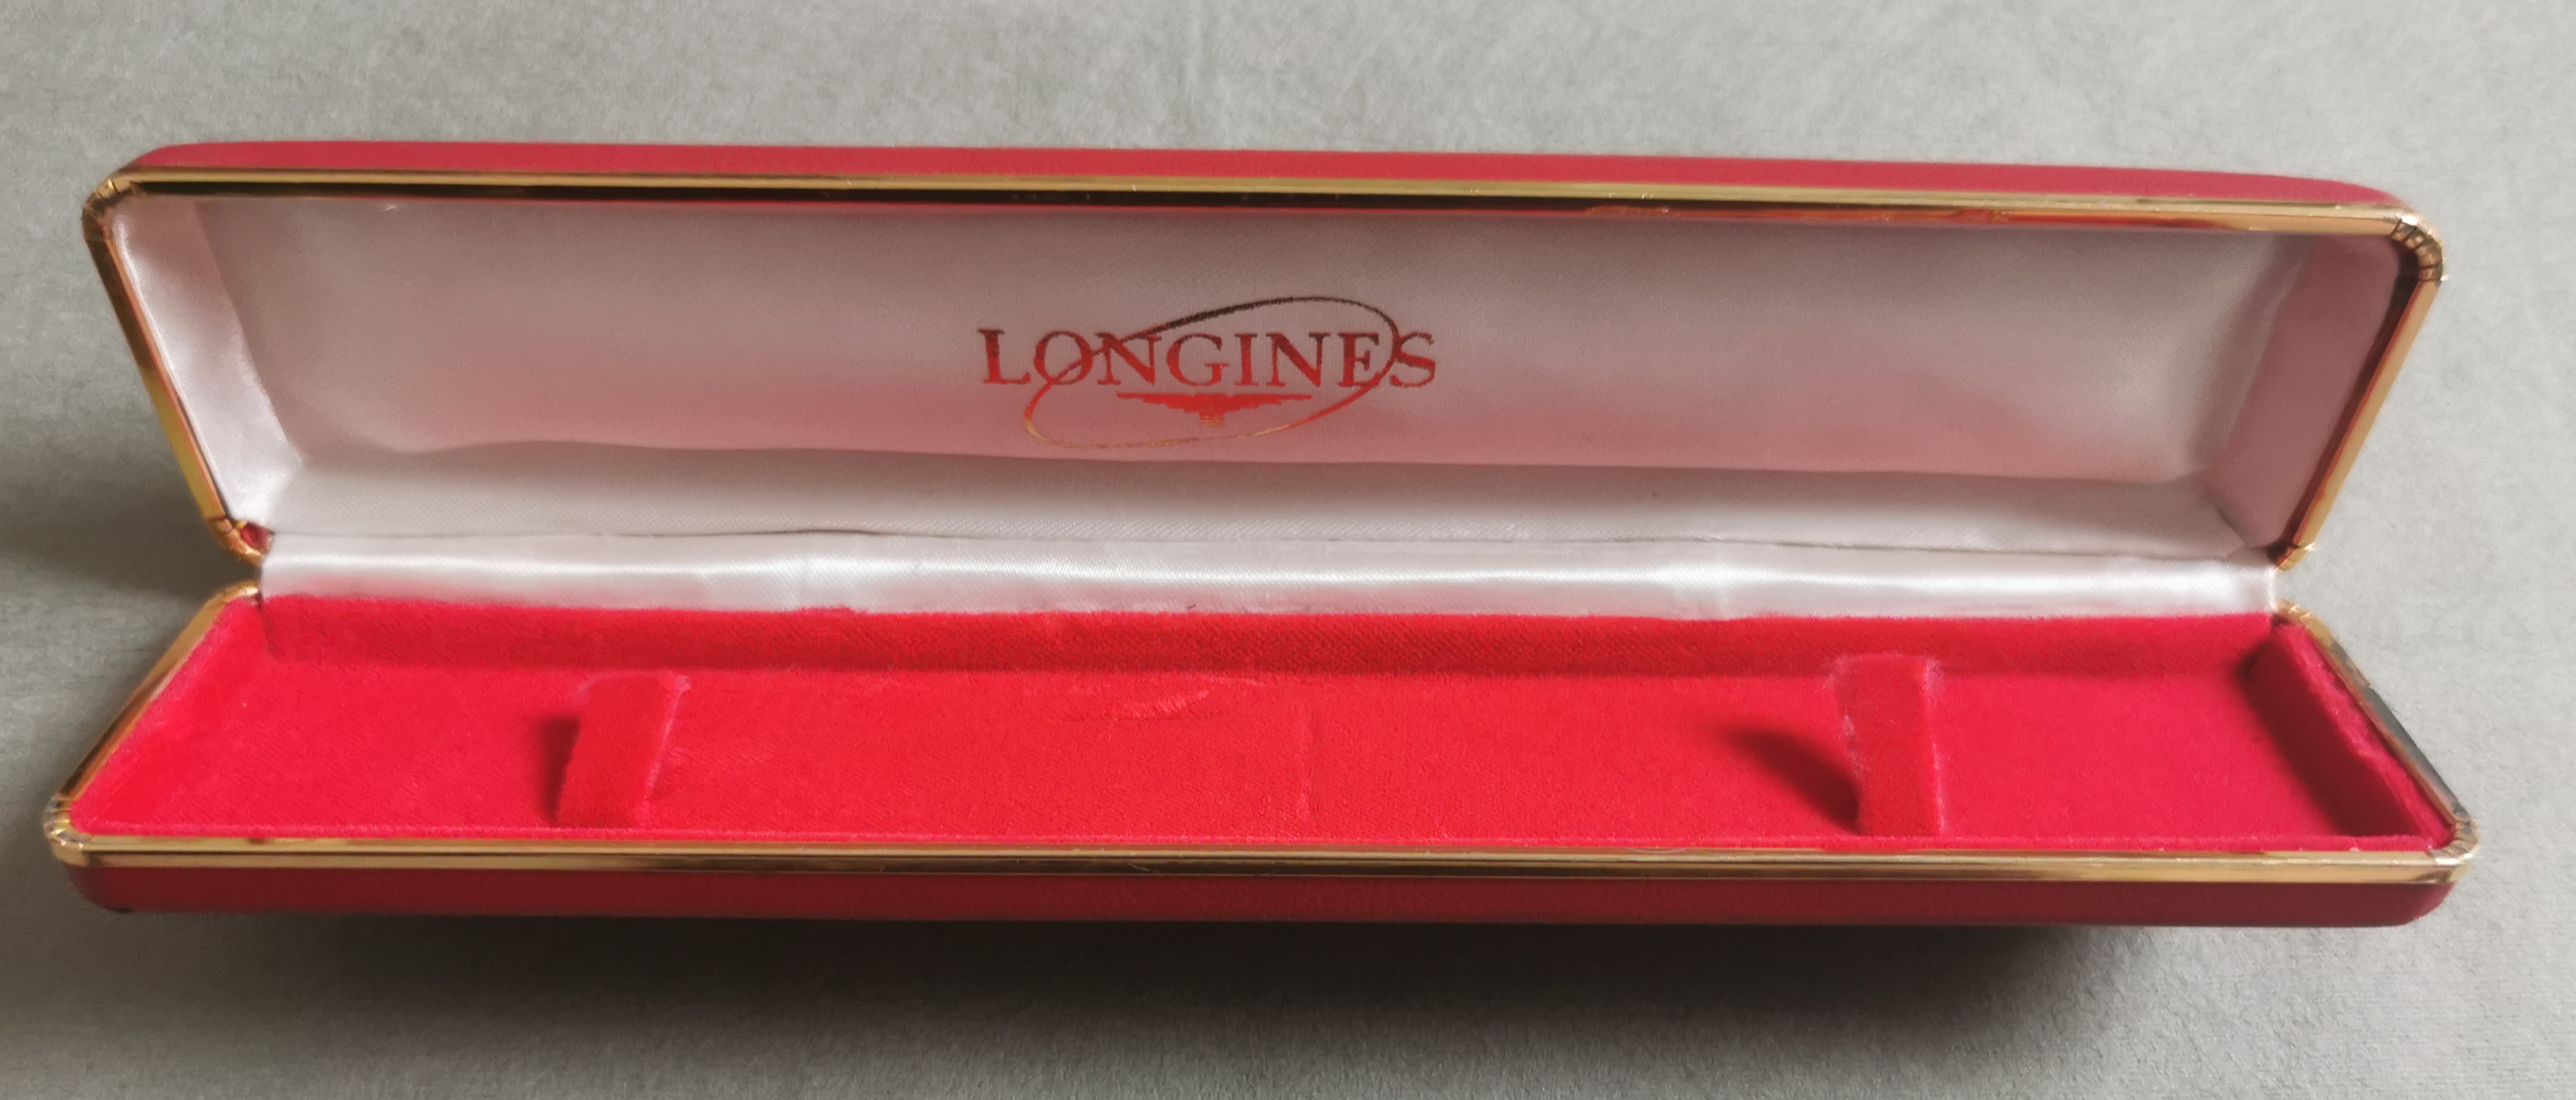 Longines rare vintage watch box red leather for lady models in good condition | San Giorgio a Cremano